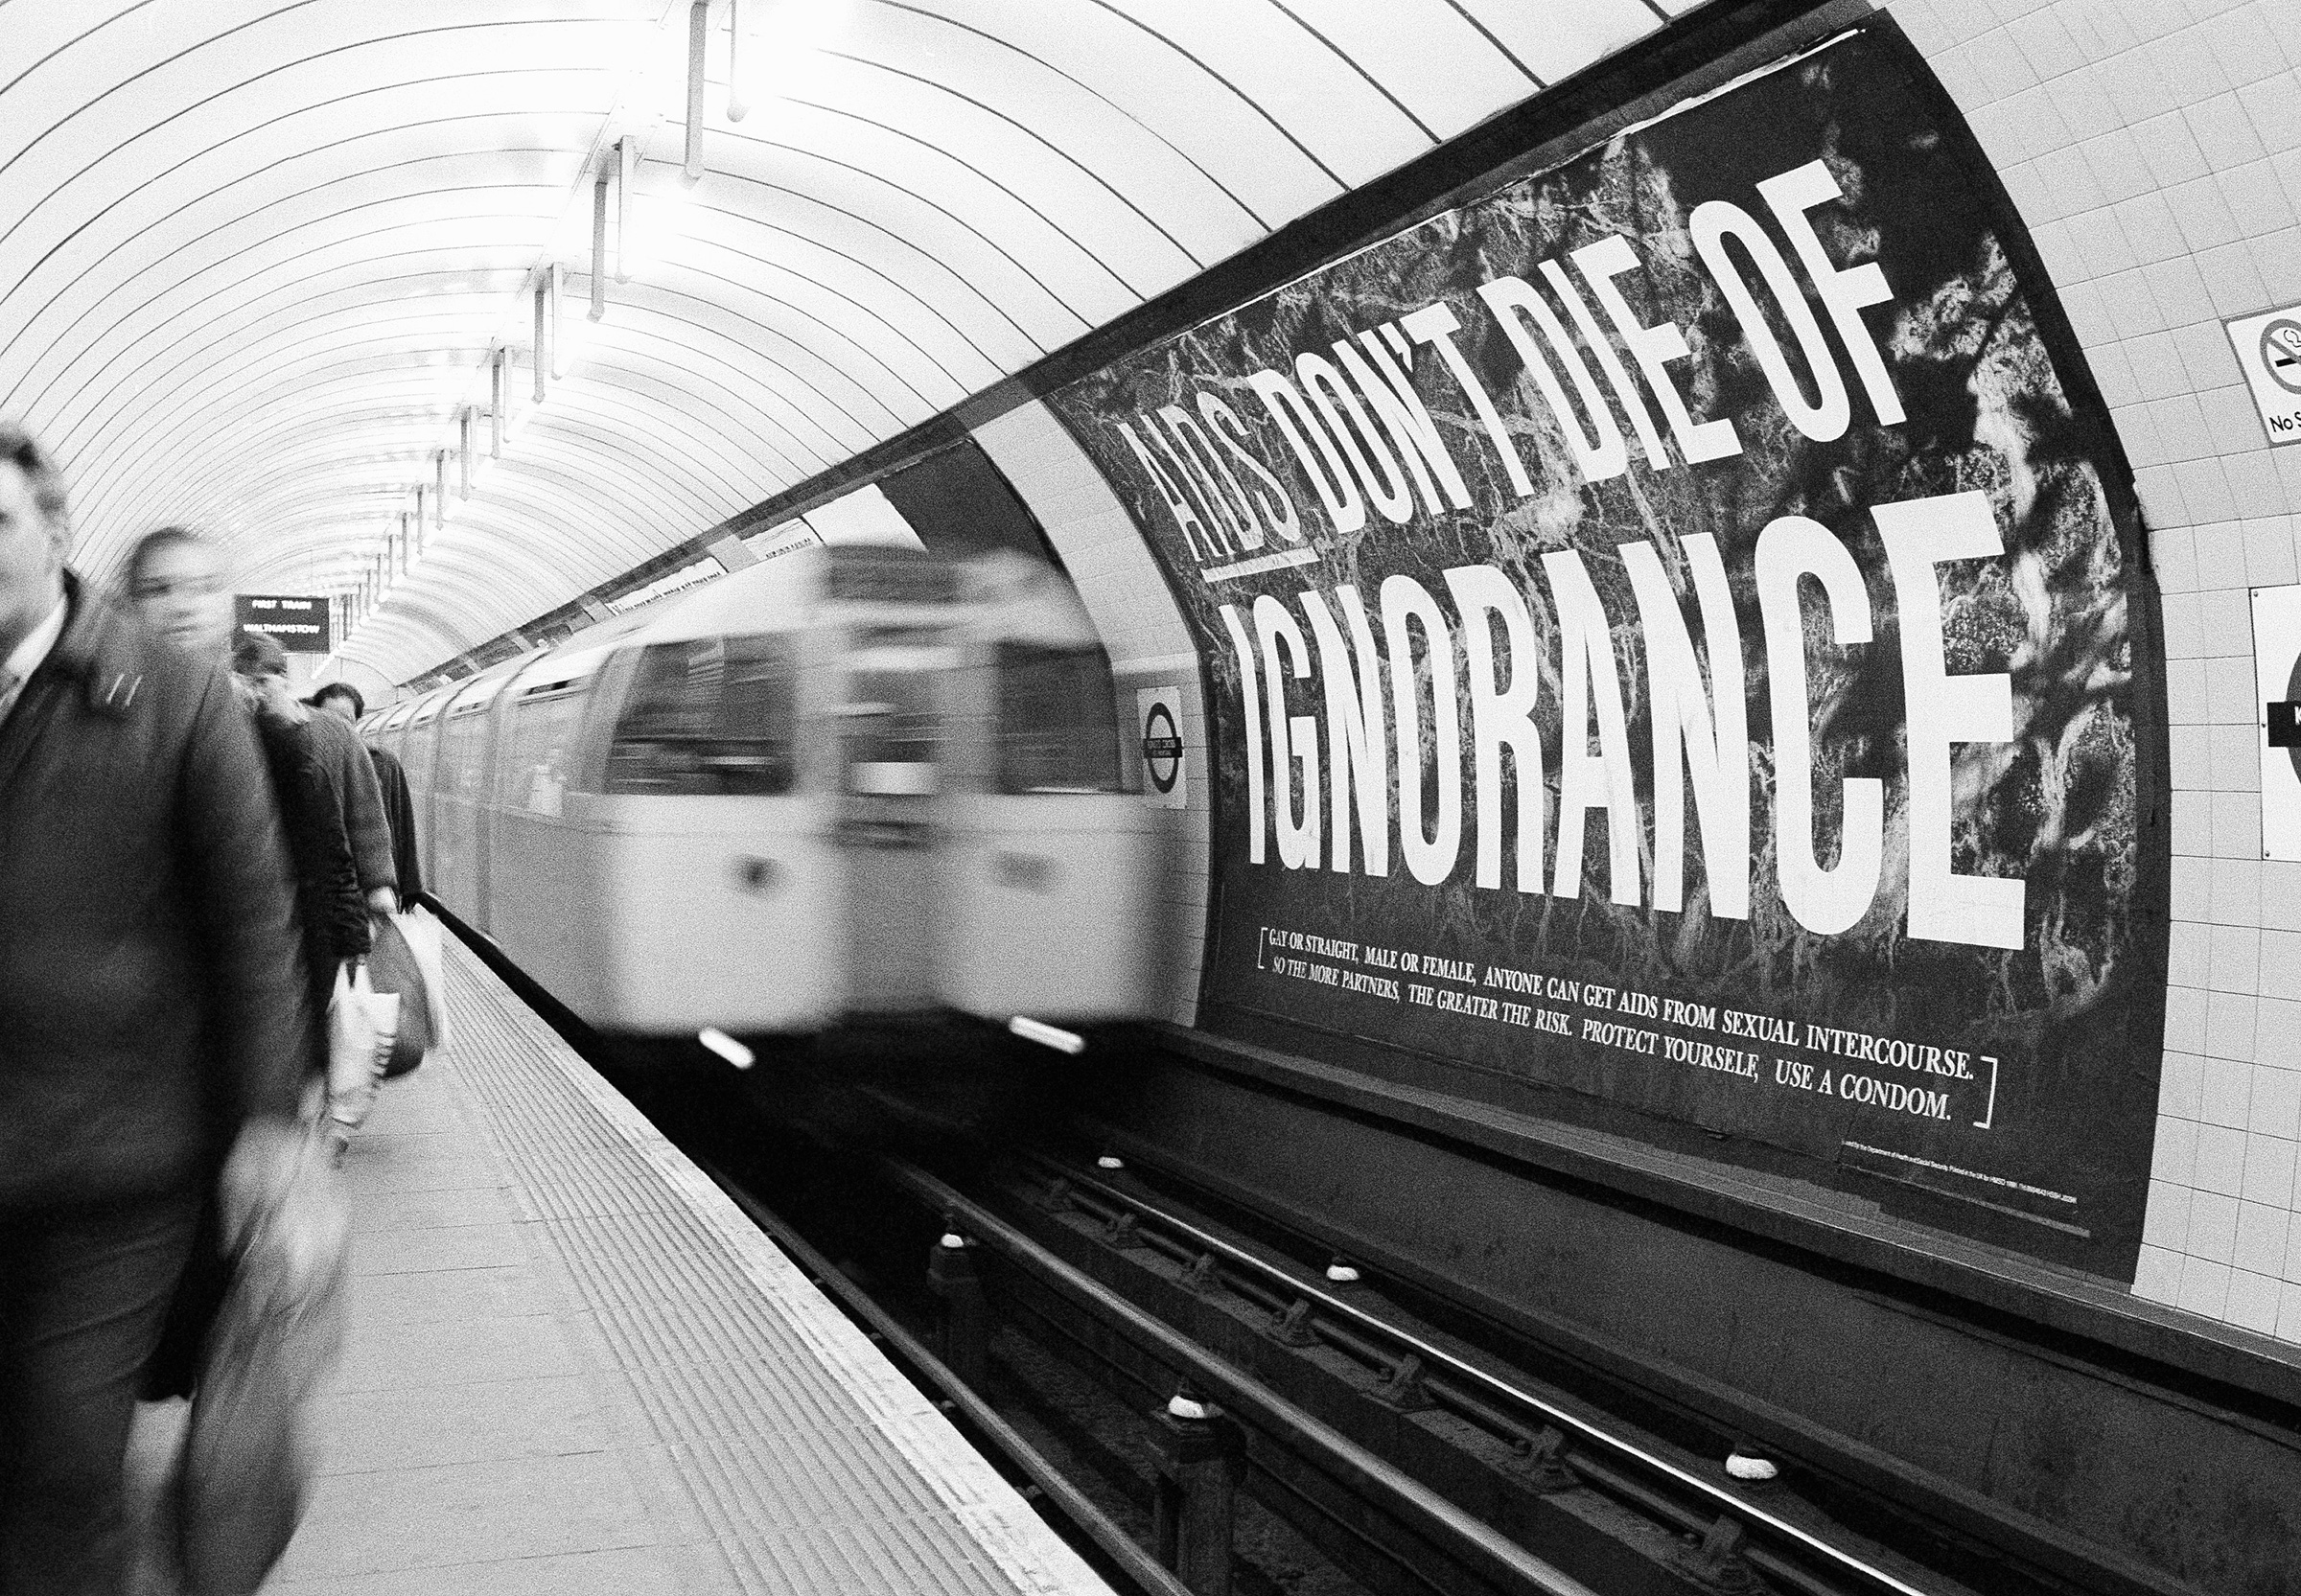 With an average of two people a day dying of AIDS in Britain, the government blitzed the nation with warning posters as part of its 20 million pound media campaign, pictured on March 5, 1987. This poster confronted passengers at the Kings Cross subway station in central London. (Gillian Allen—AP)